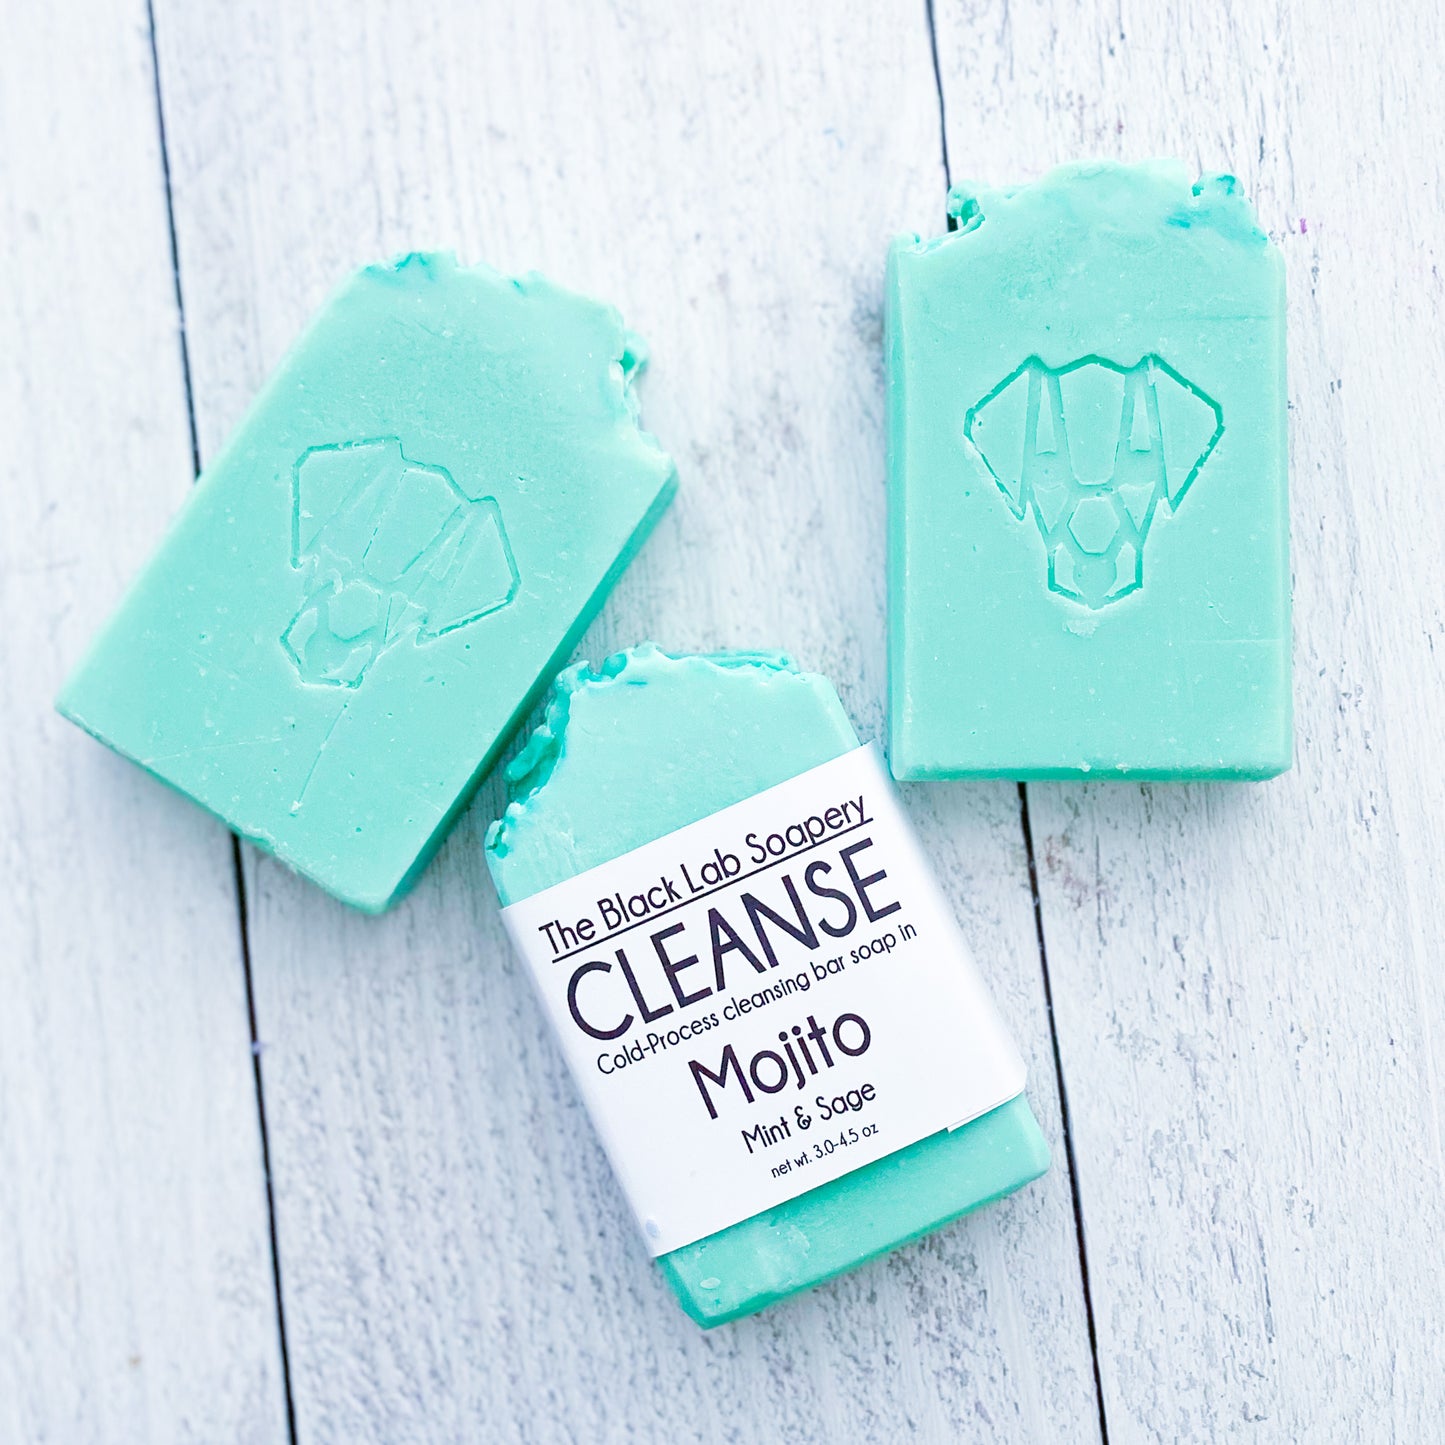 CLEANSE - Cold Process Cleansing Bar Soap - Mojito